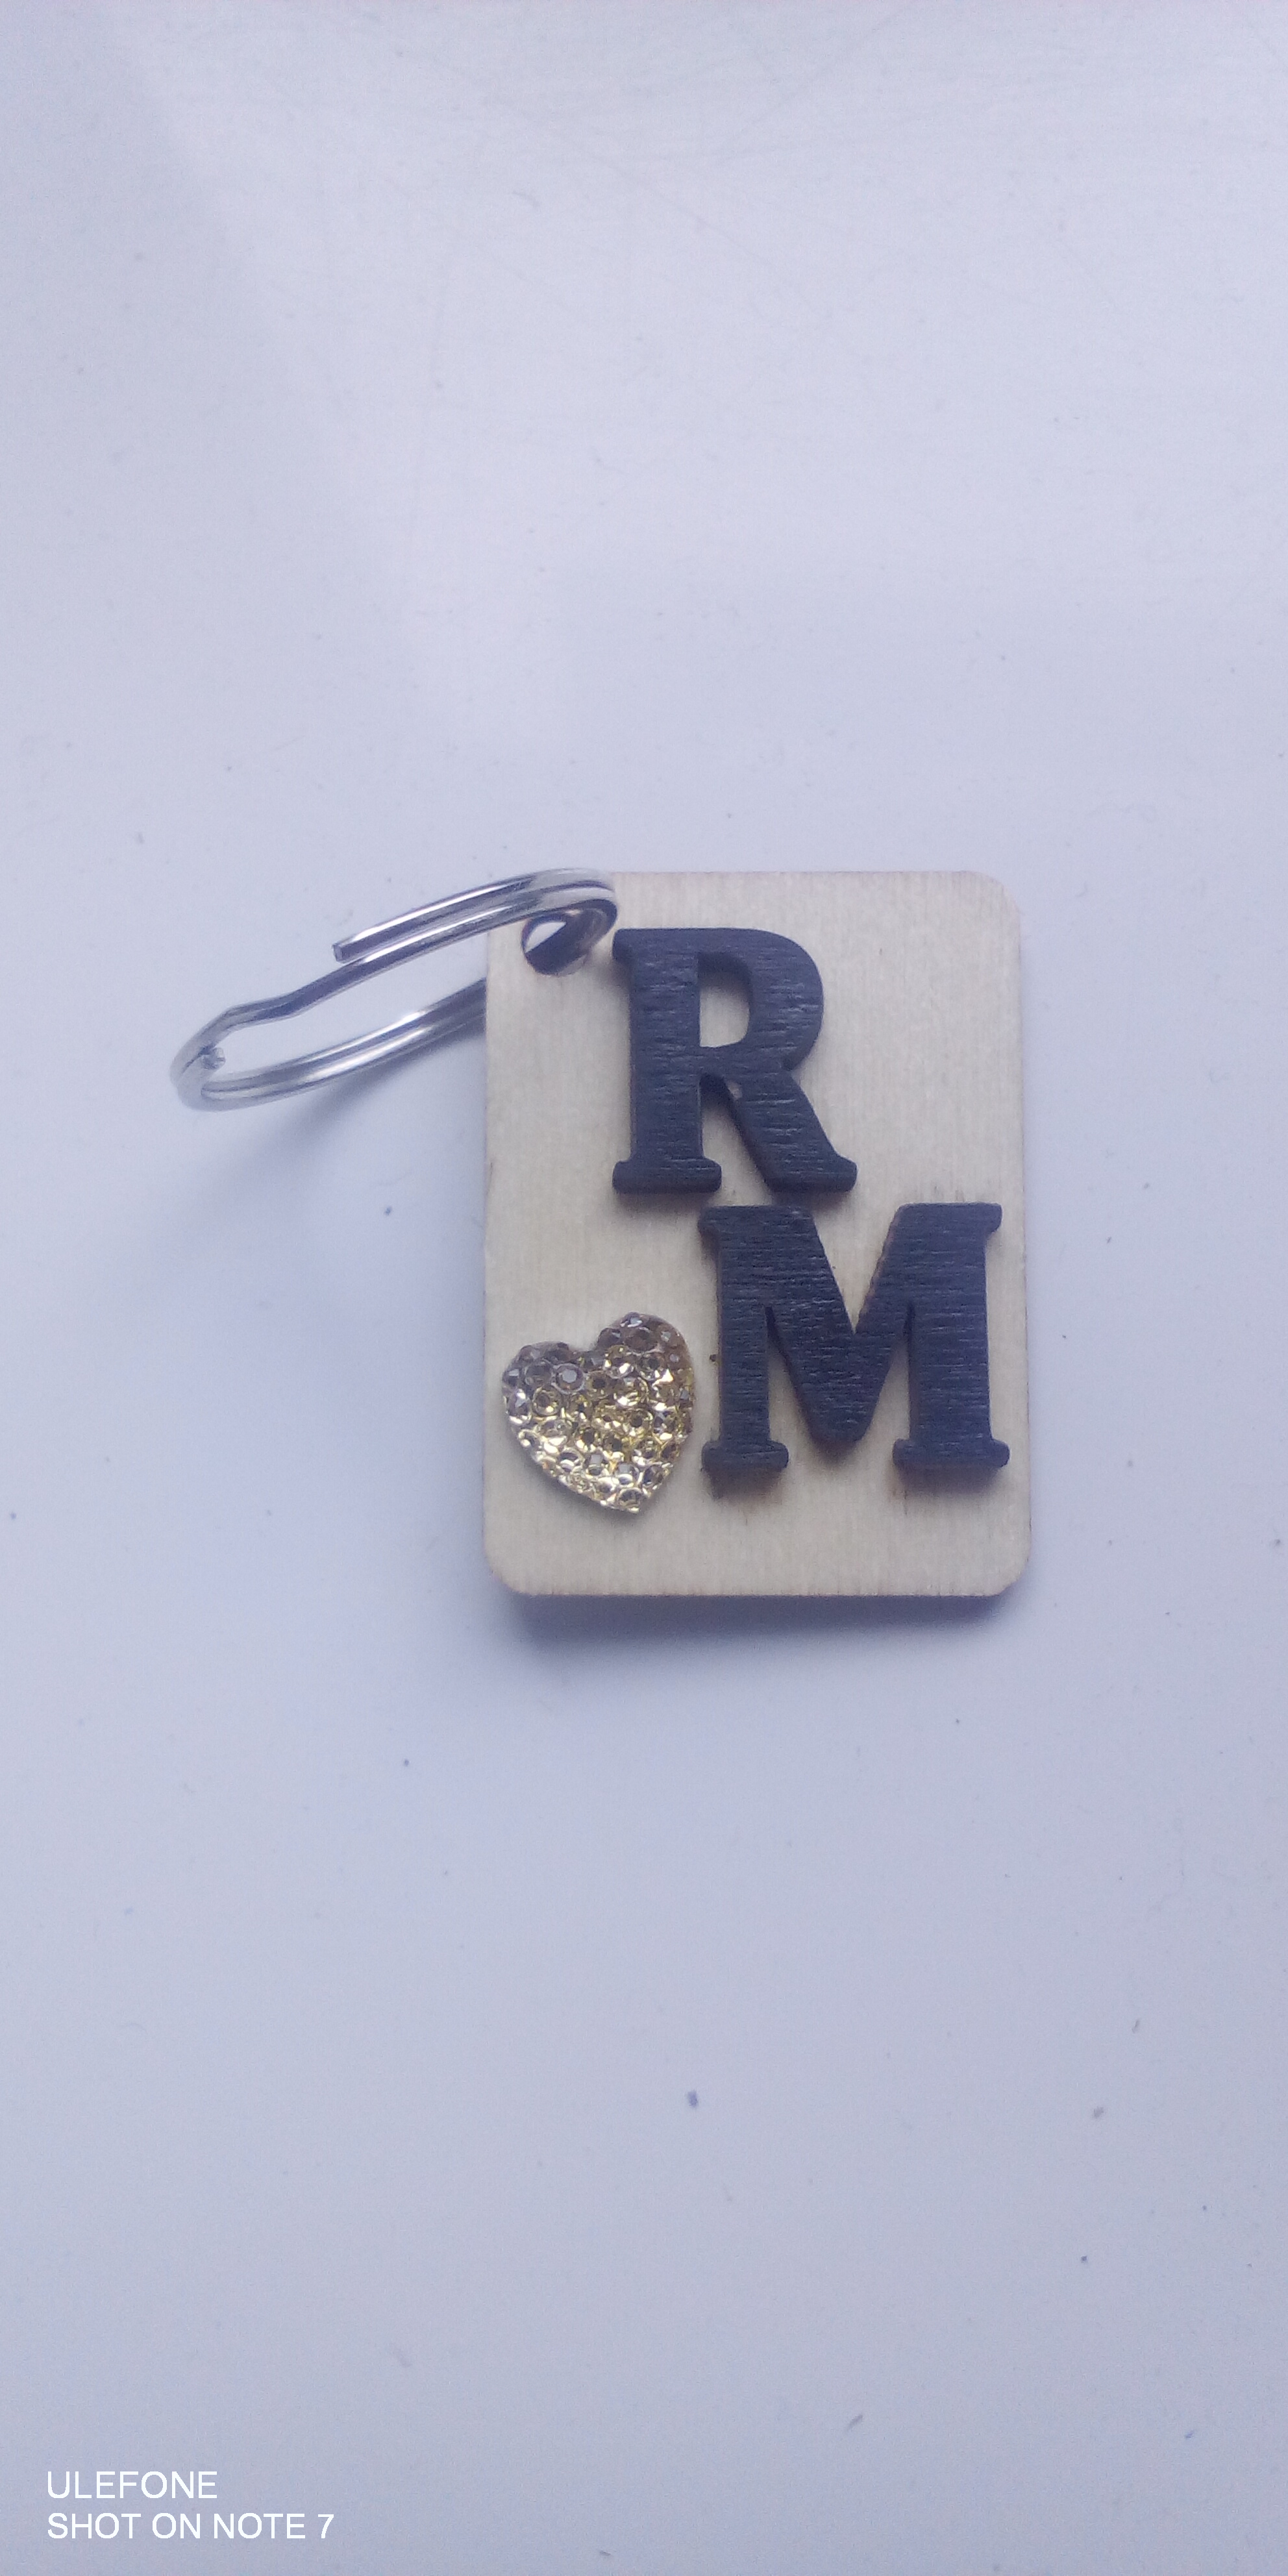 An example of a keyring made with the initials on.n